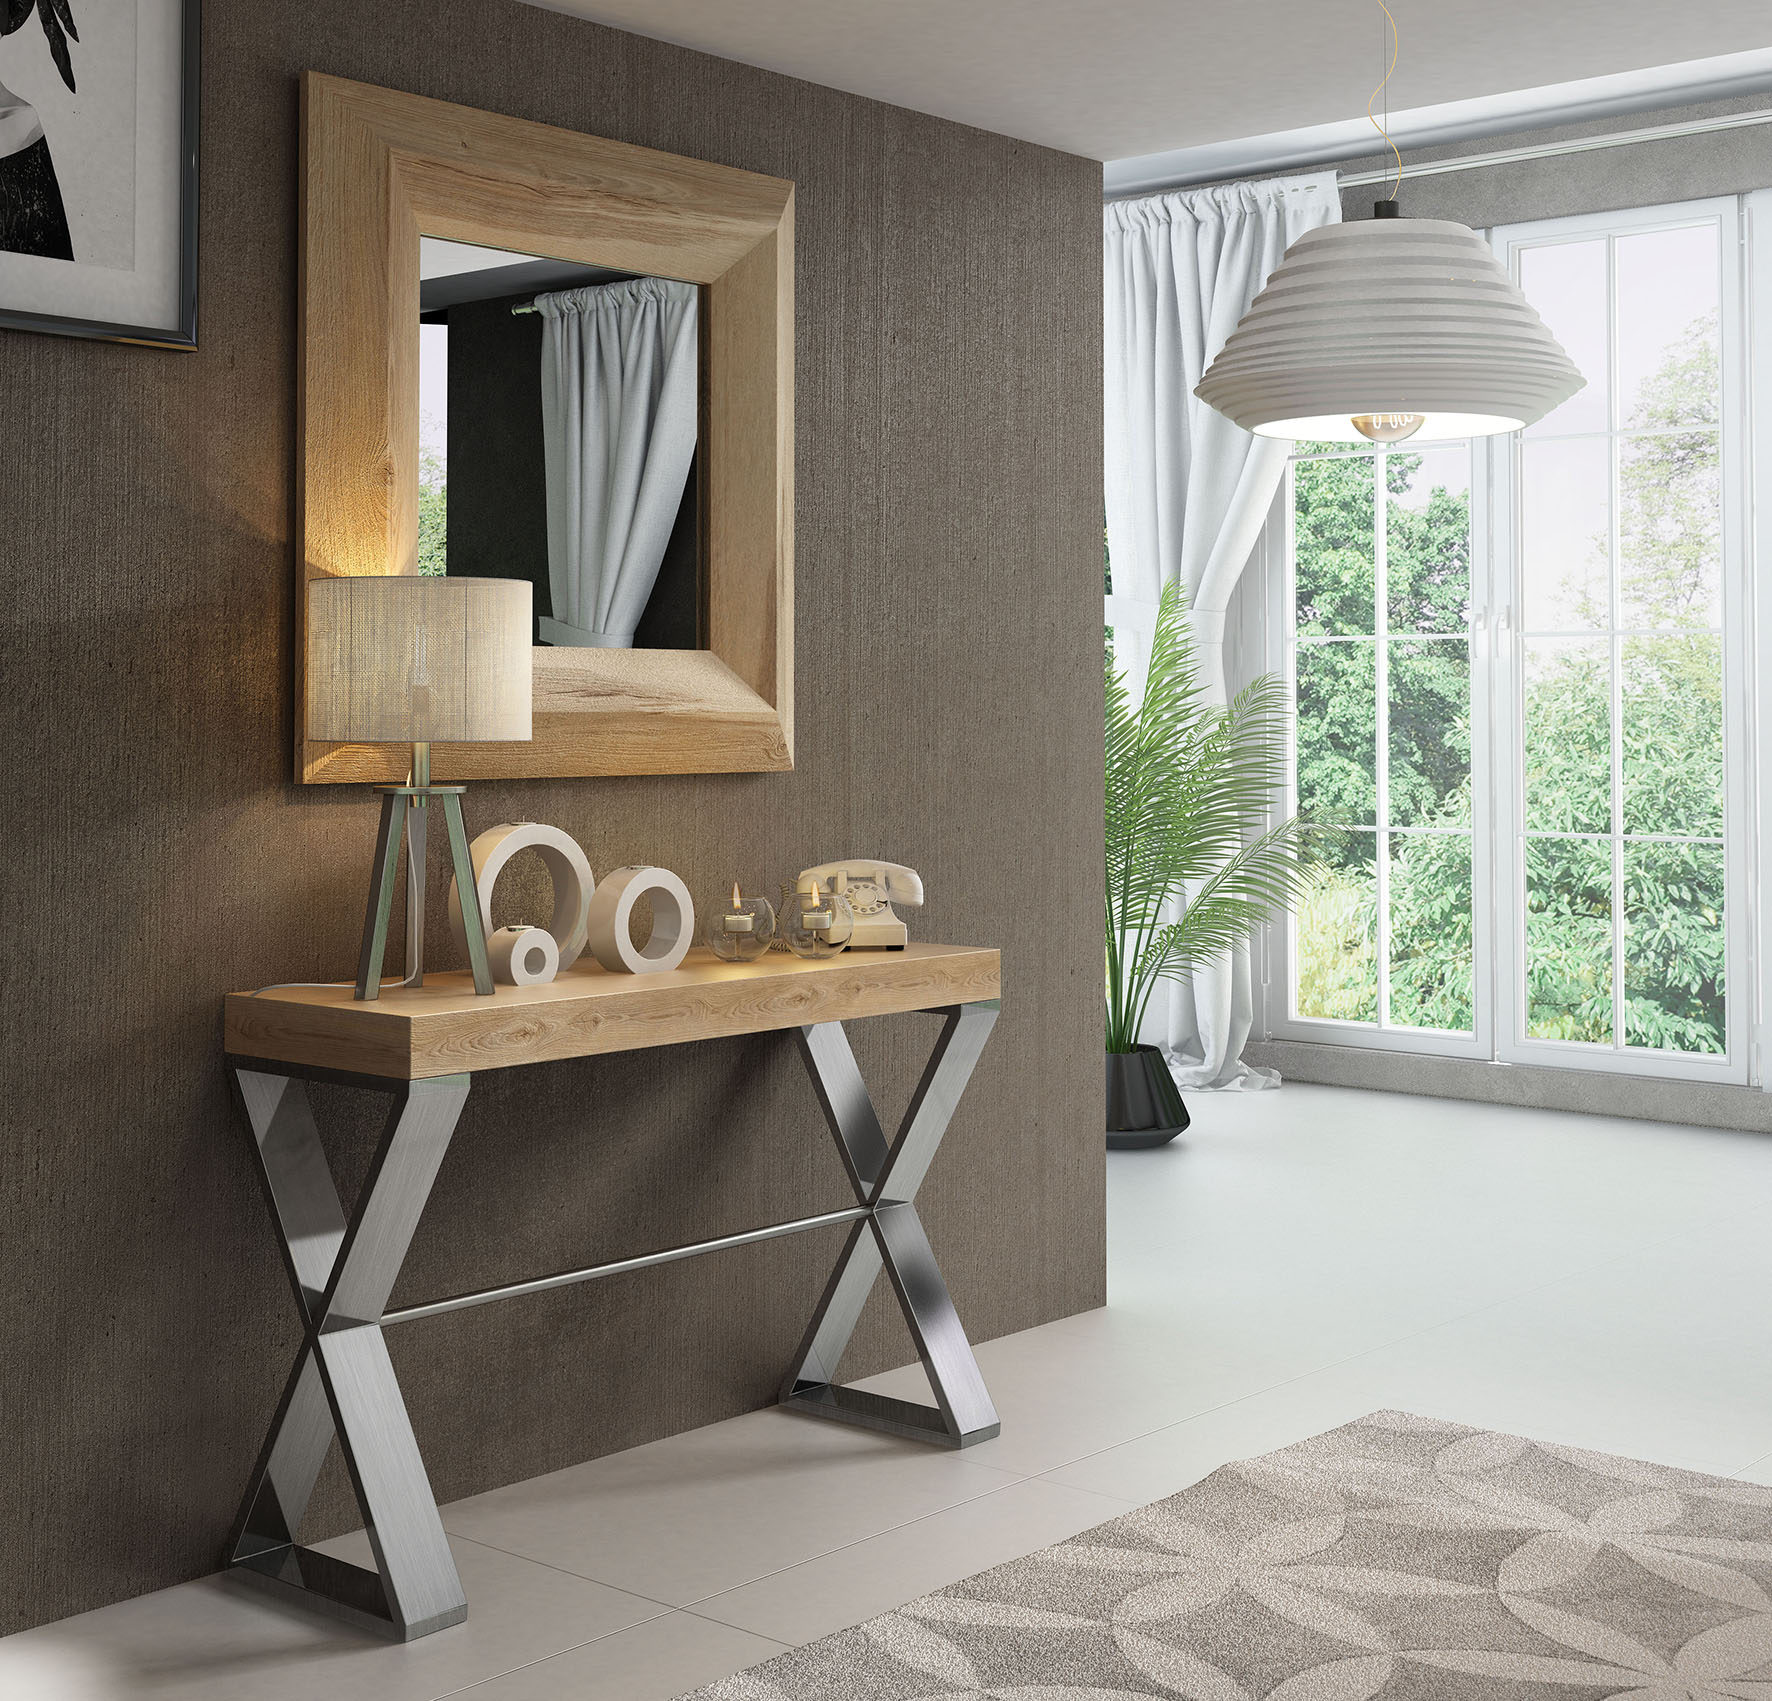 Brands MSC Modern Wall Unit, Italy CII.31 Console Table